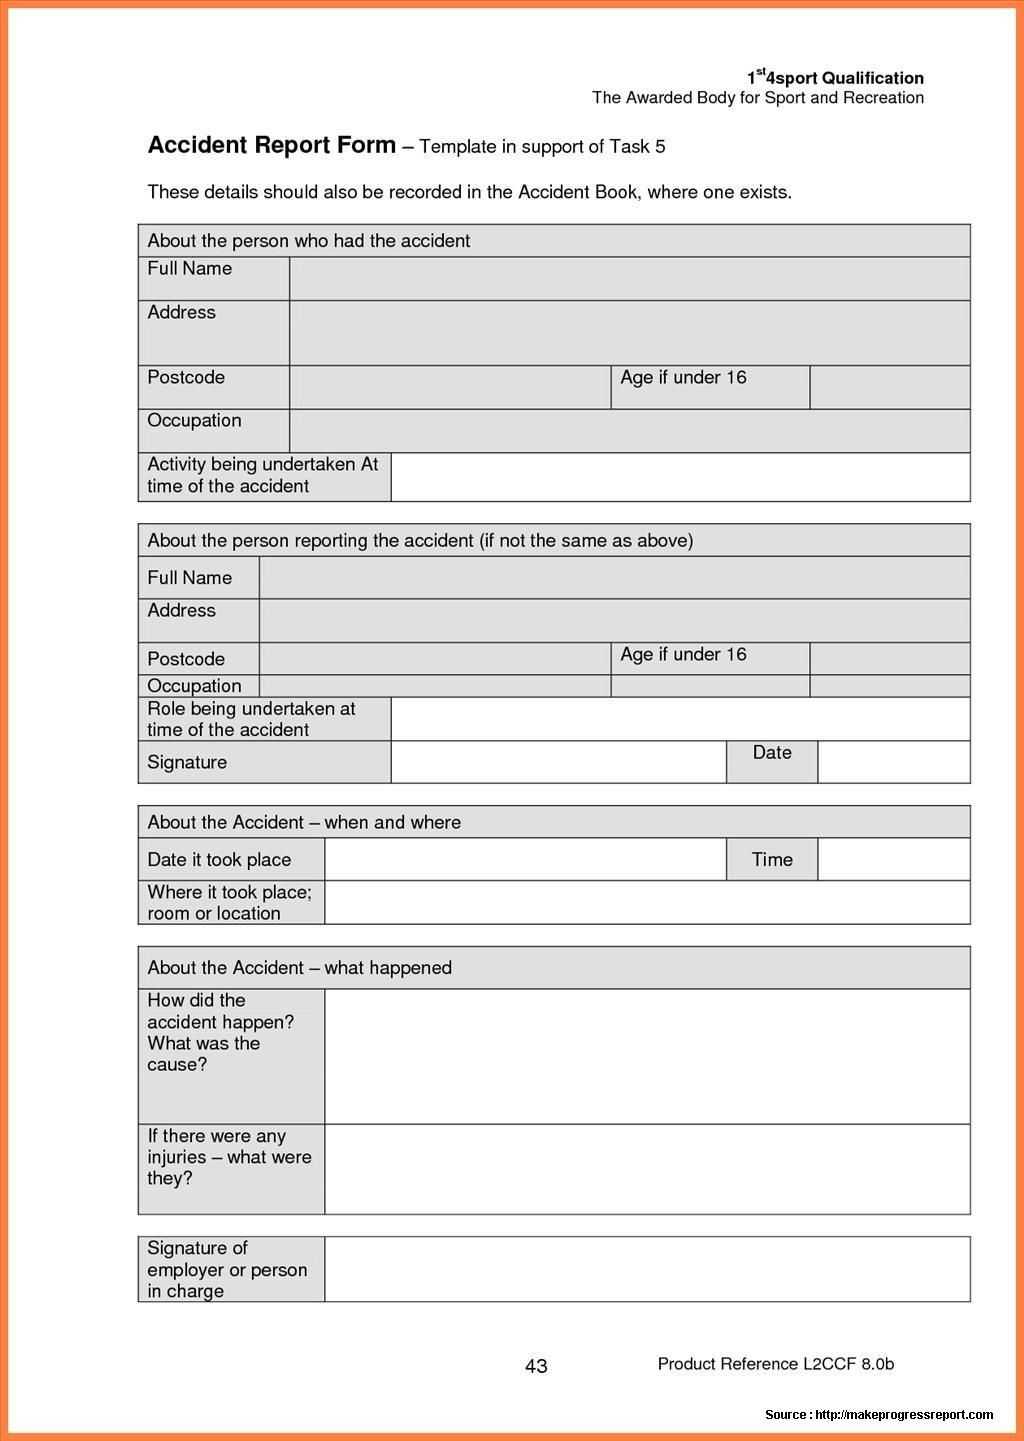 Construction Accident Report Form Sample | Incident Report In Customer Incident Report Form Template